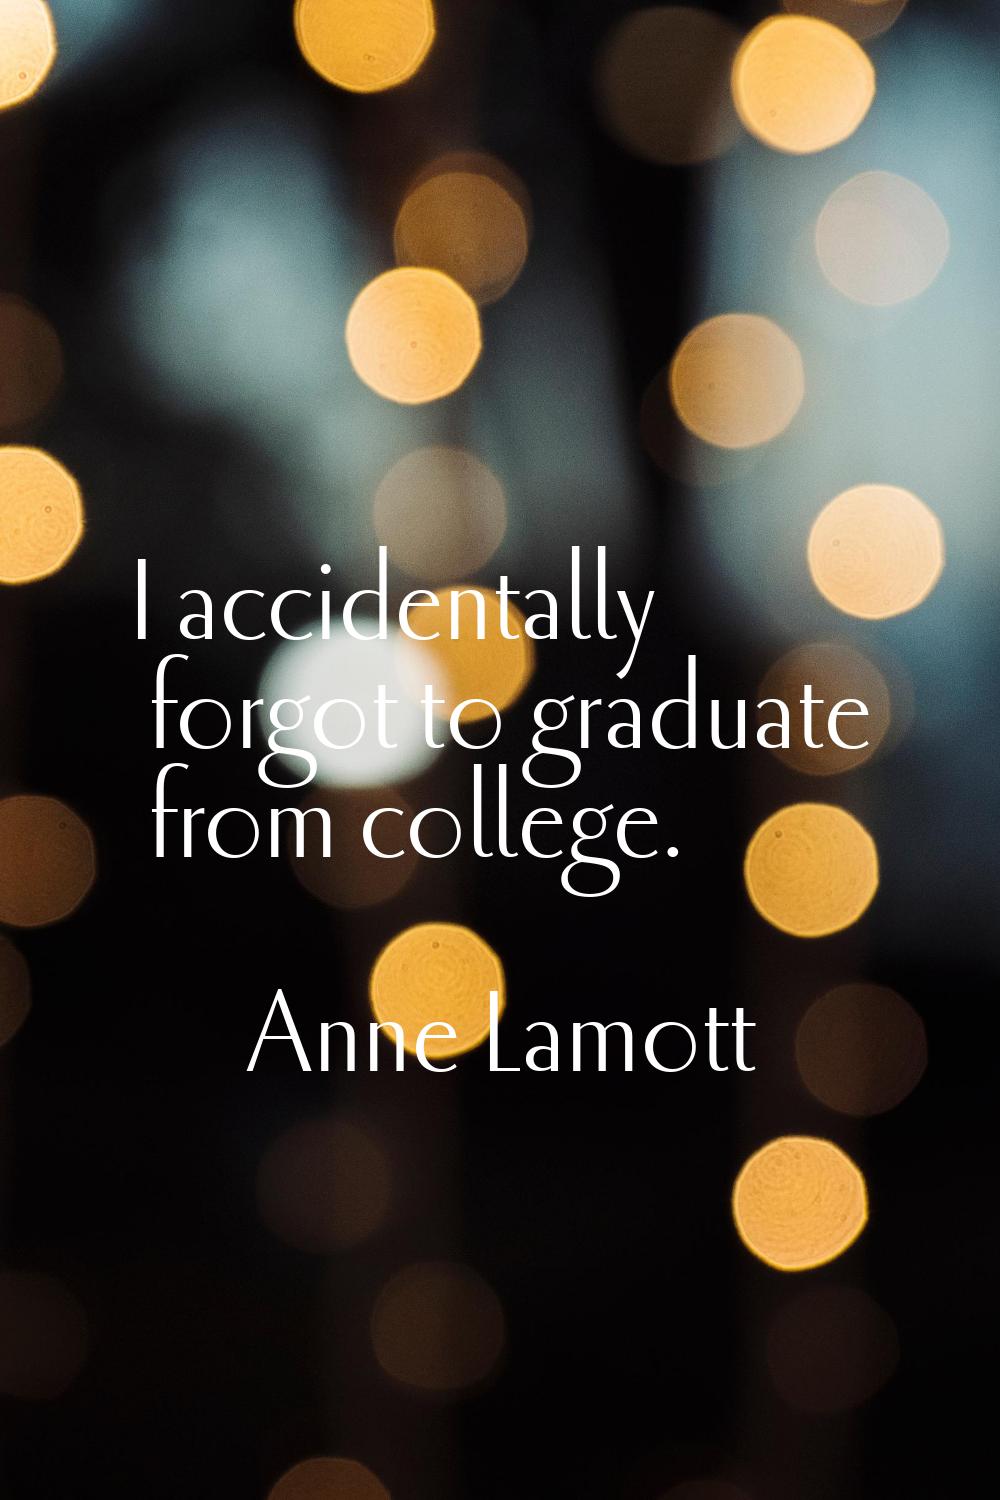 I accidentally forgot to graduate from college.